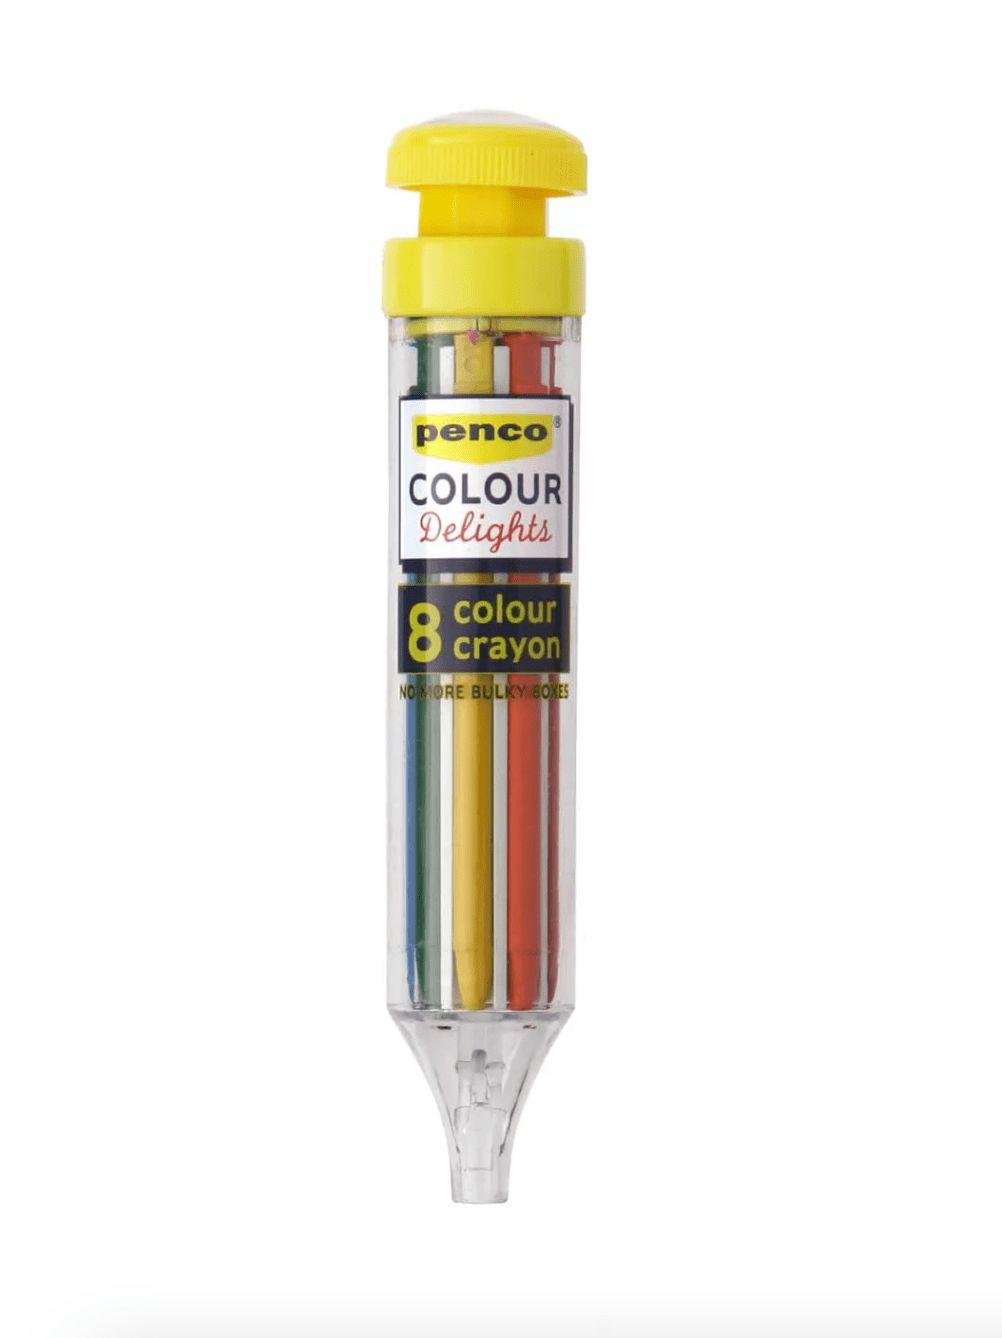 A yellow 8 Color Crayon pen with a rainbow colored tip by PENCO.